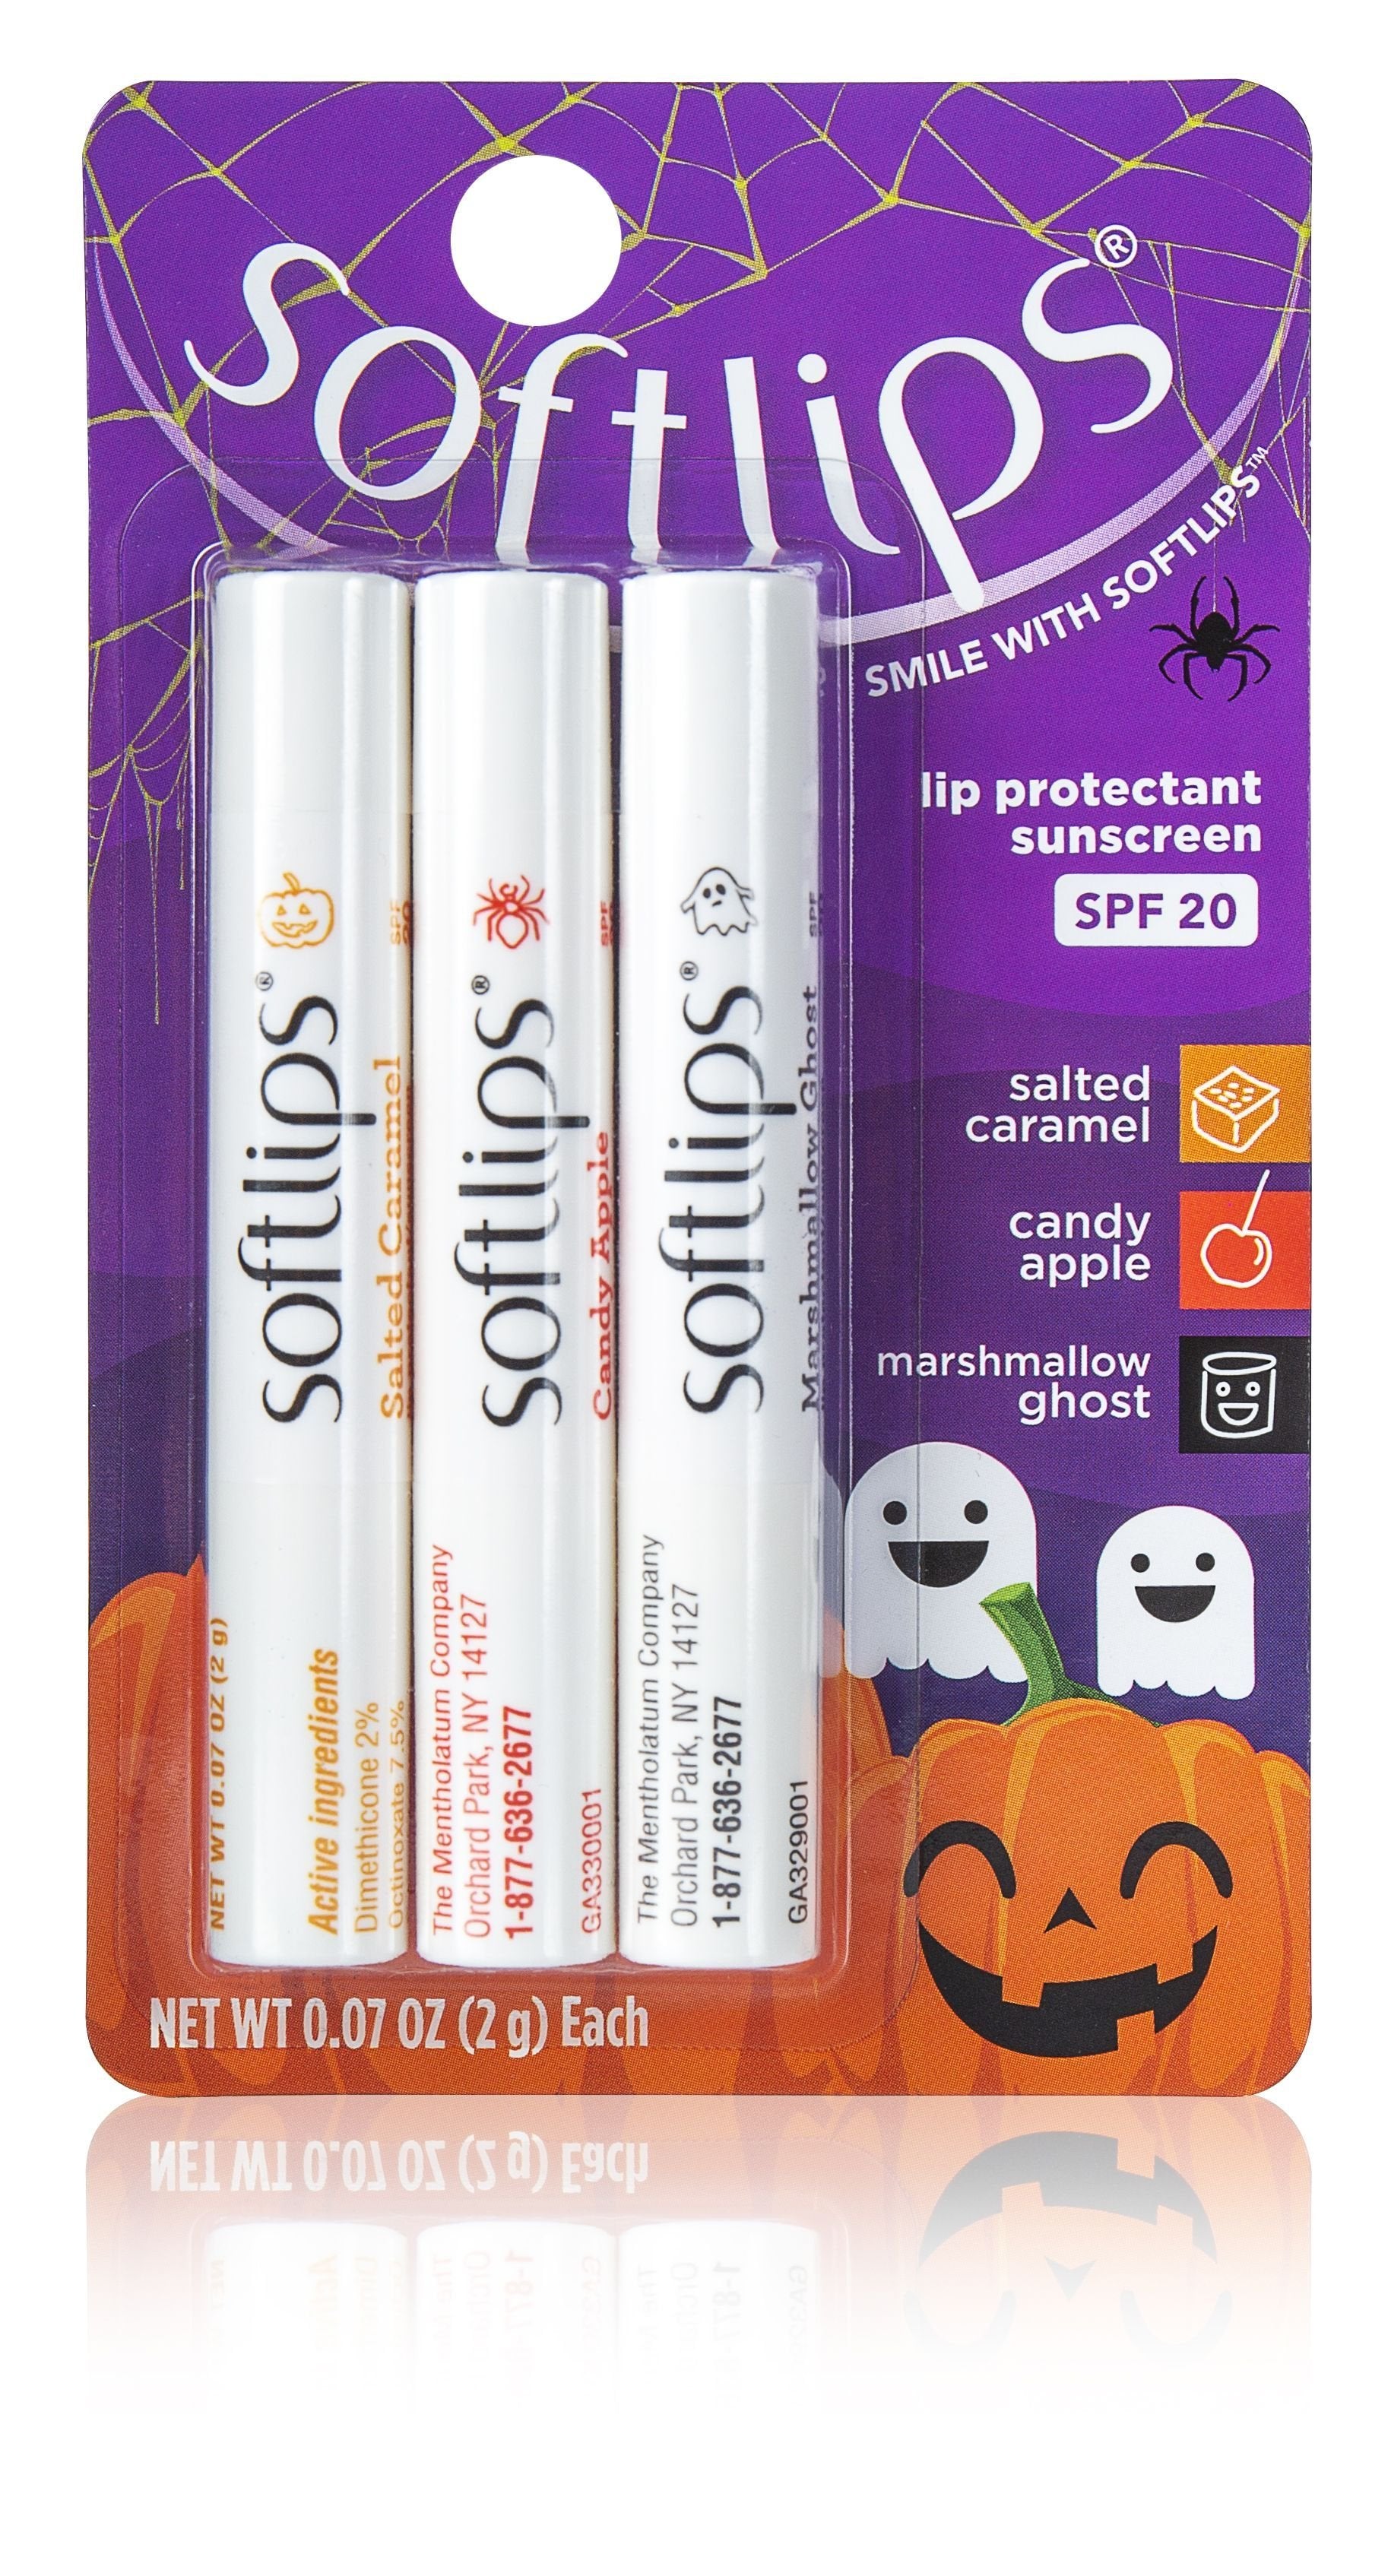 Softlips Limited Edition Halloween Lip Balm Pack - Salted Caramel, Candy Apple and Marshmallow Ghost - Glumech